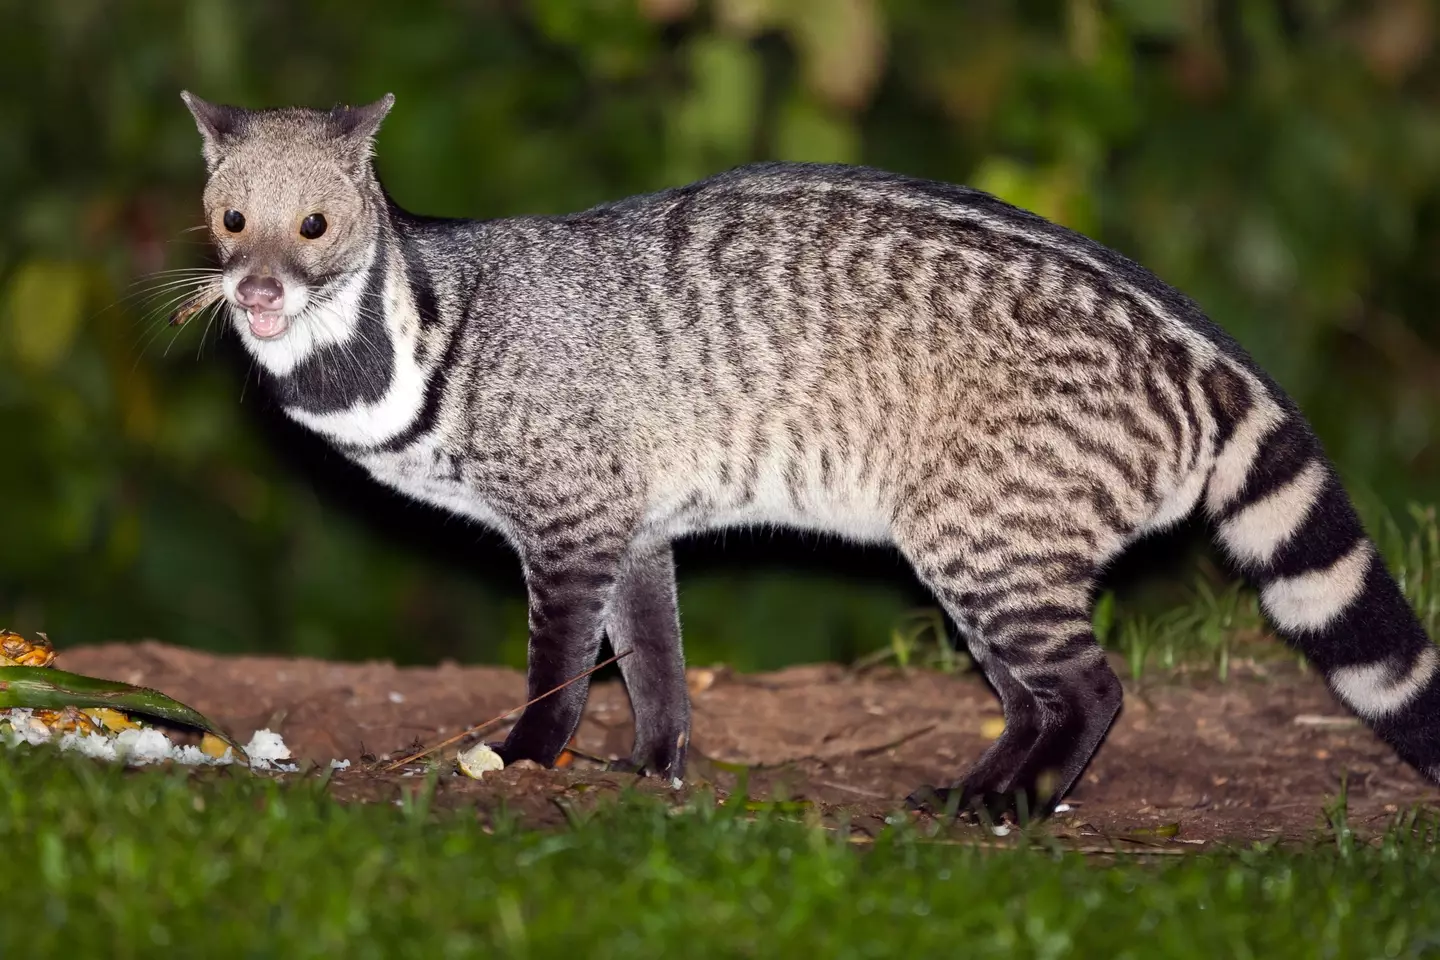 People are convinced the creature is a civet.